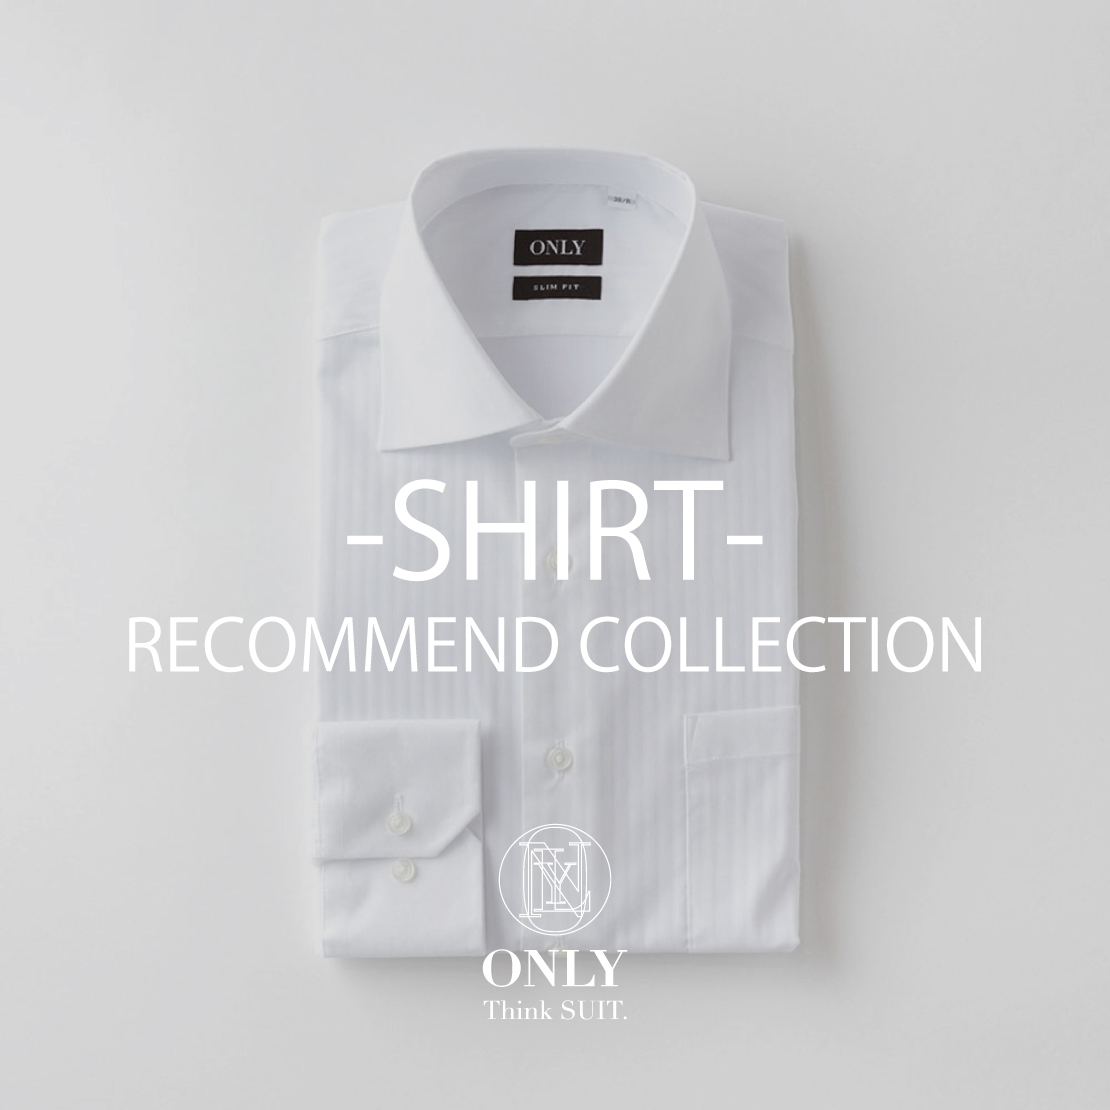 SHIRT RECOMMEND COLLECTION